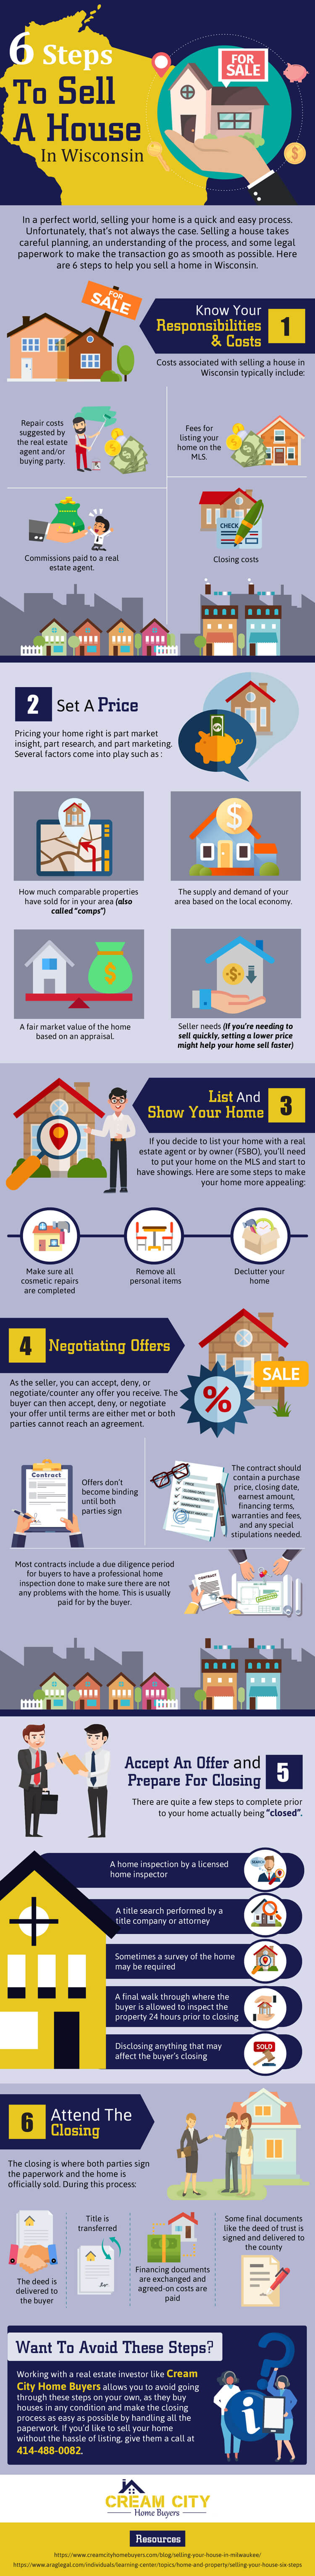 6 Steps To Sell A House In Wisconsin